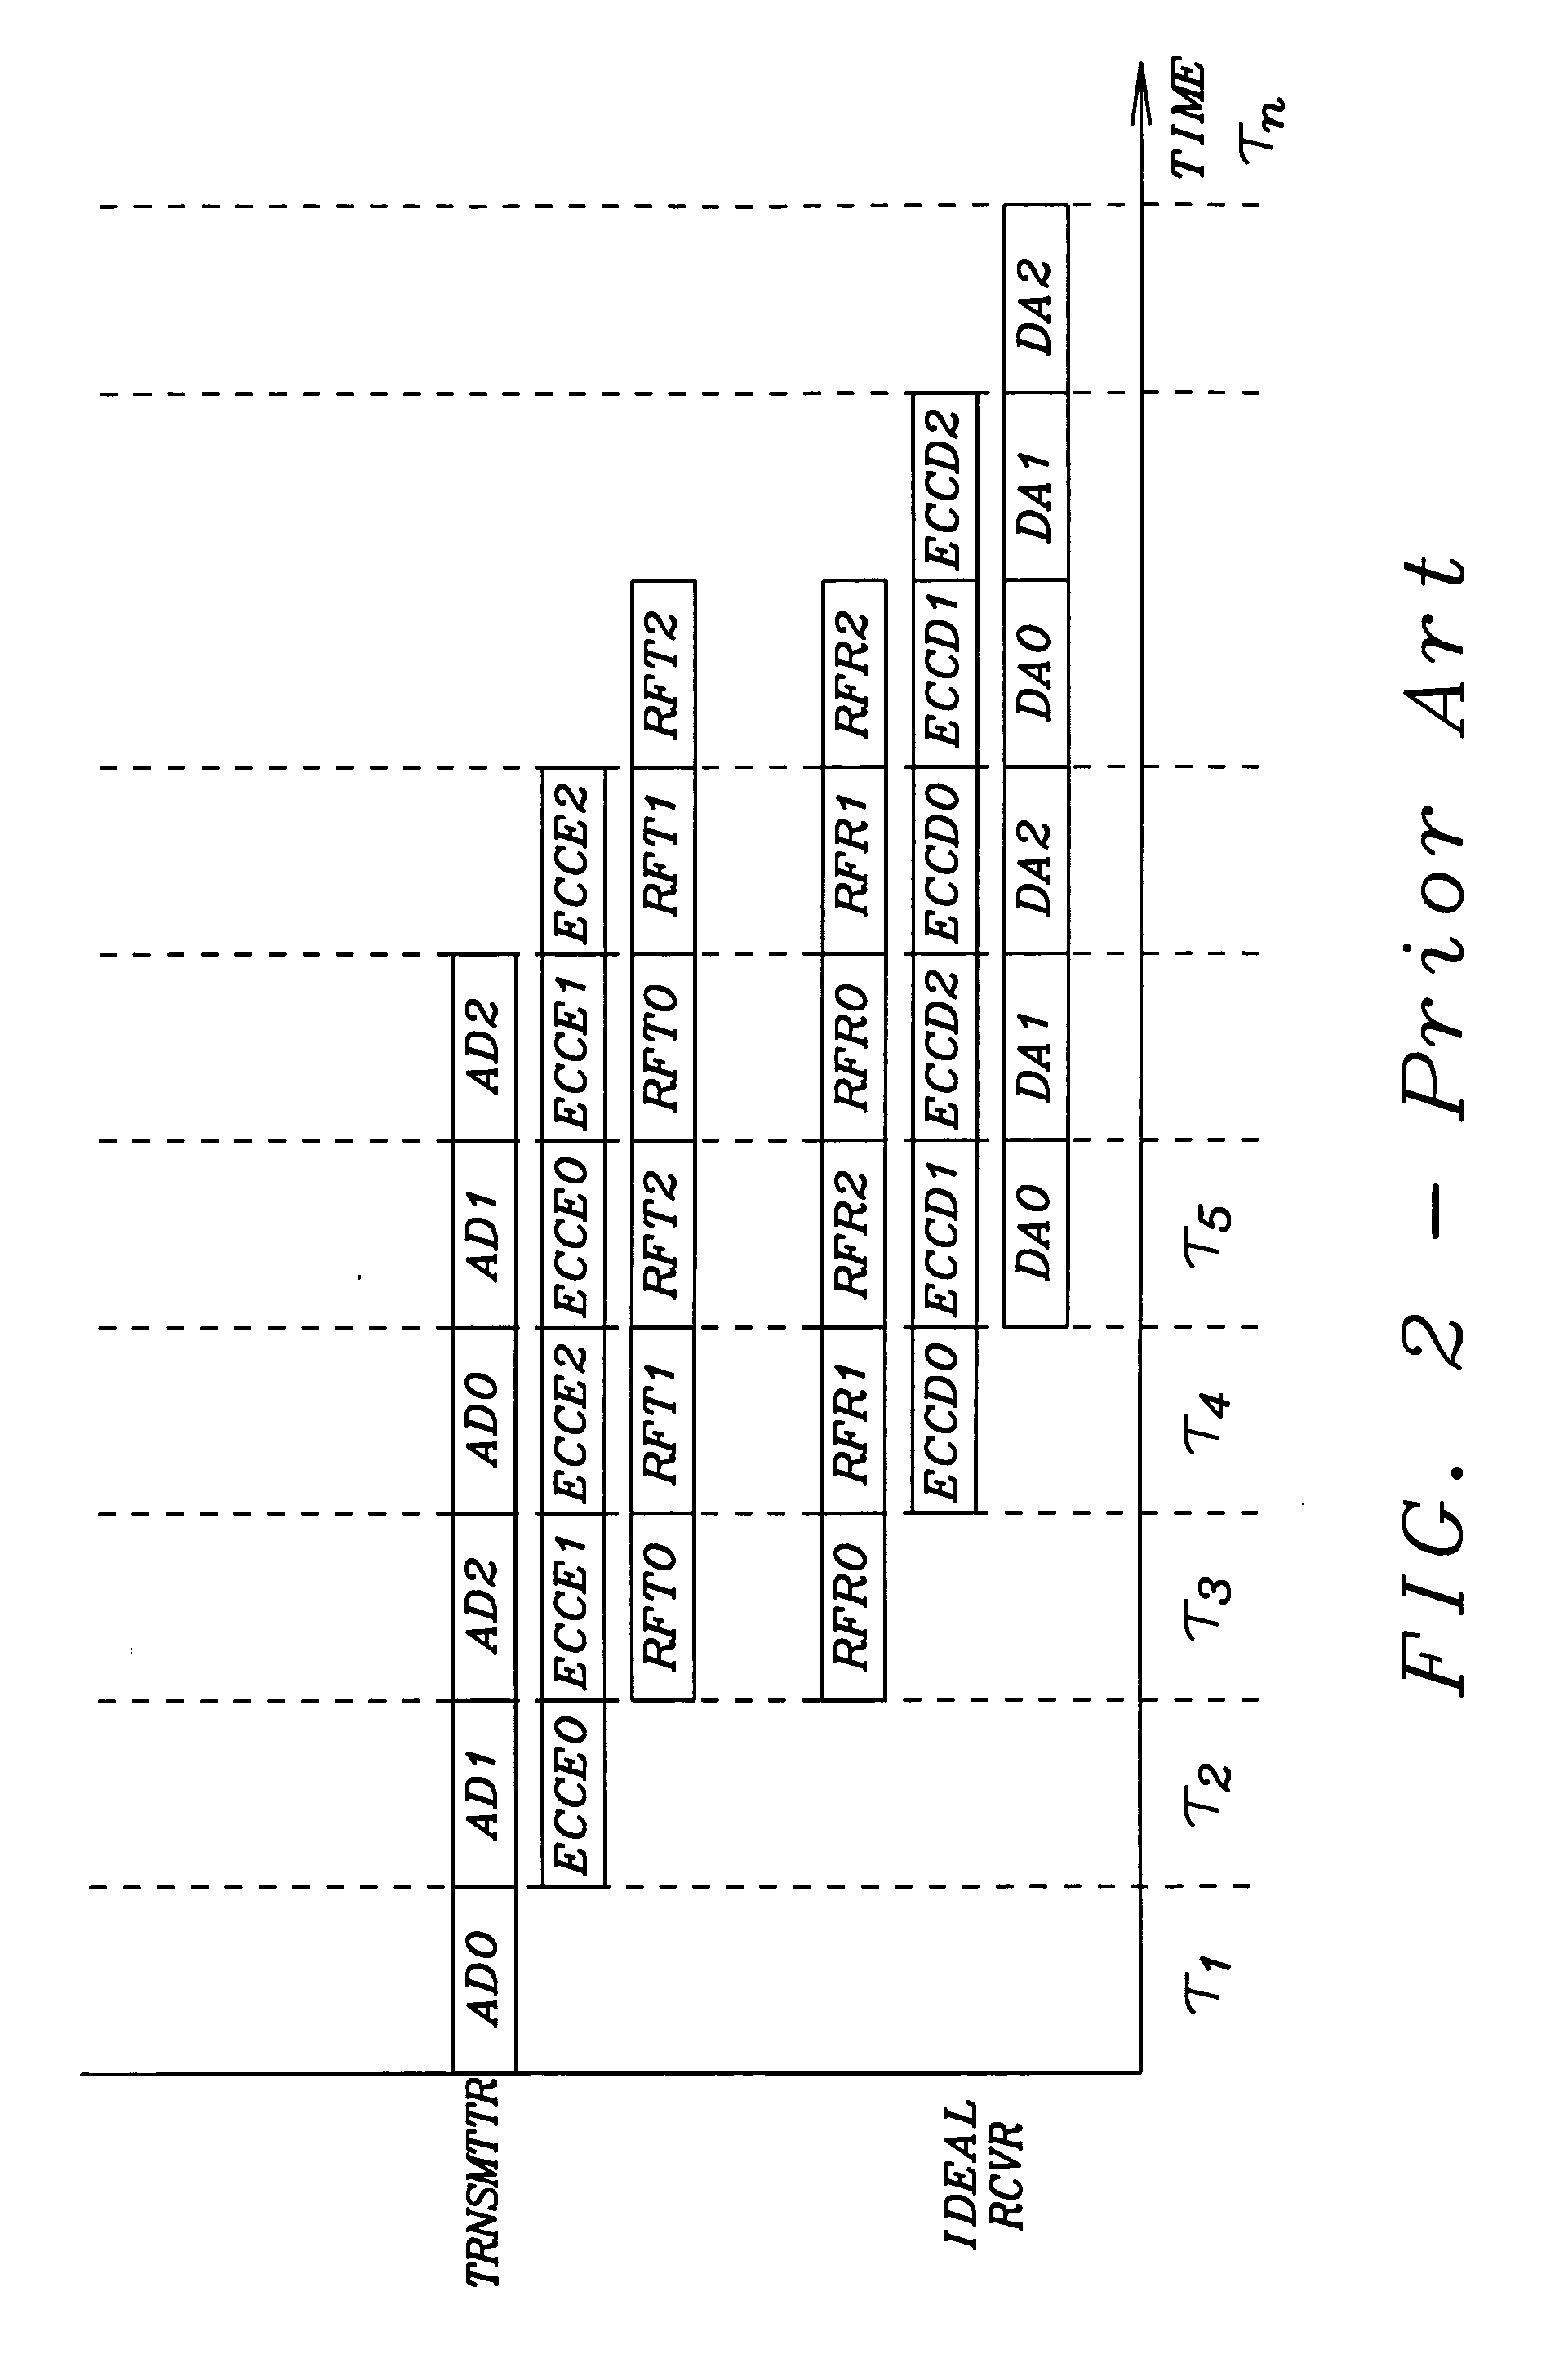 Method and apparatus for ensuring high quality audio playback in a wireless or wired digital audio communication system